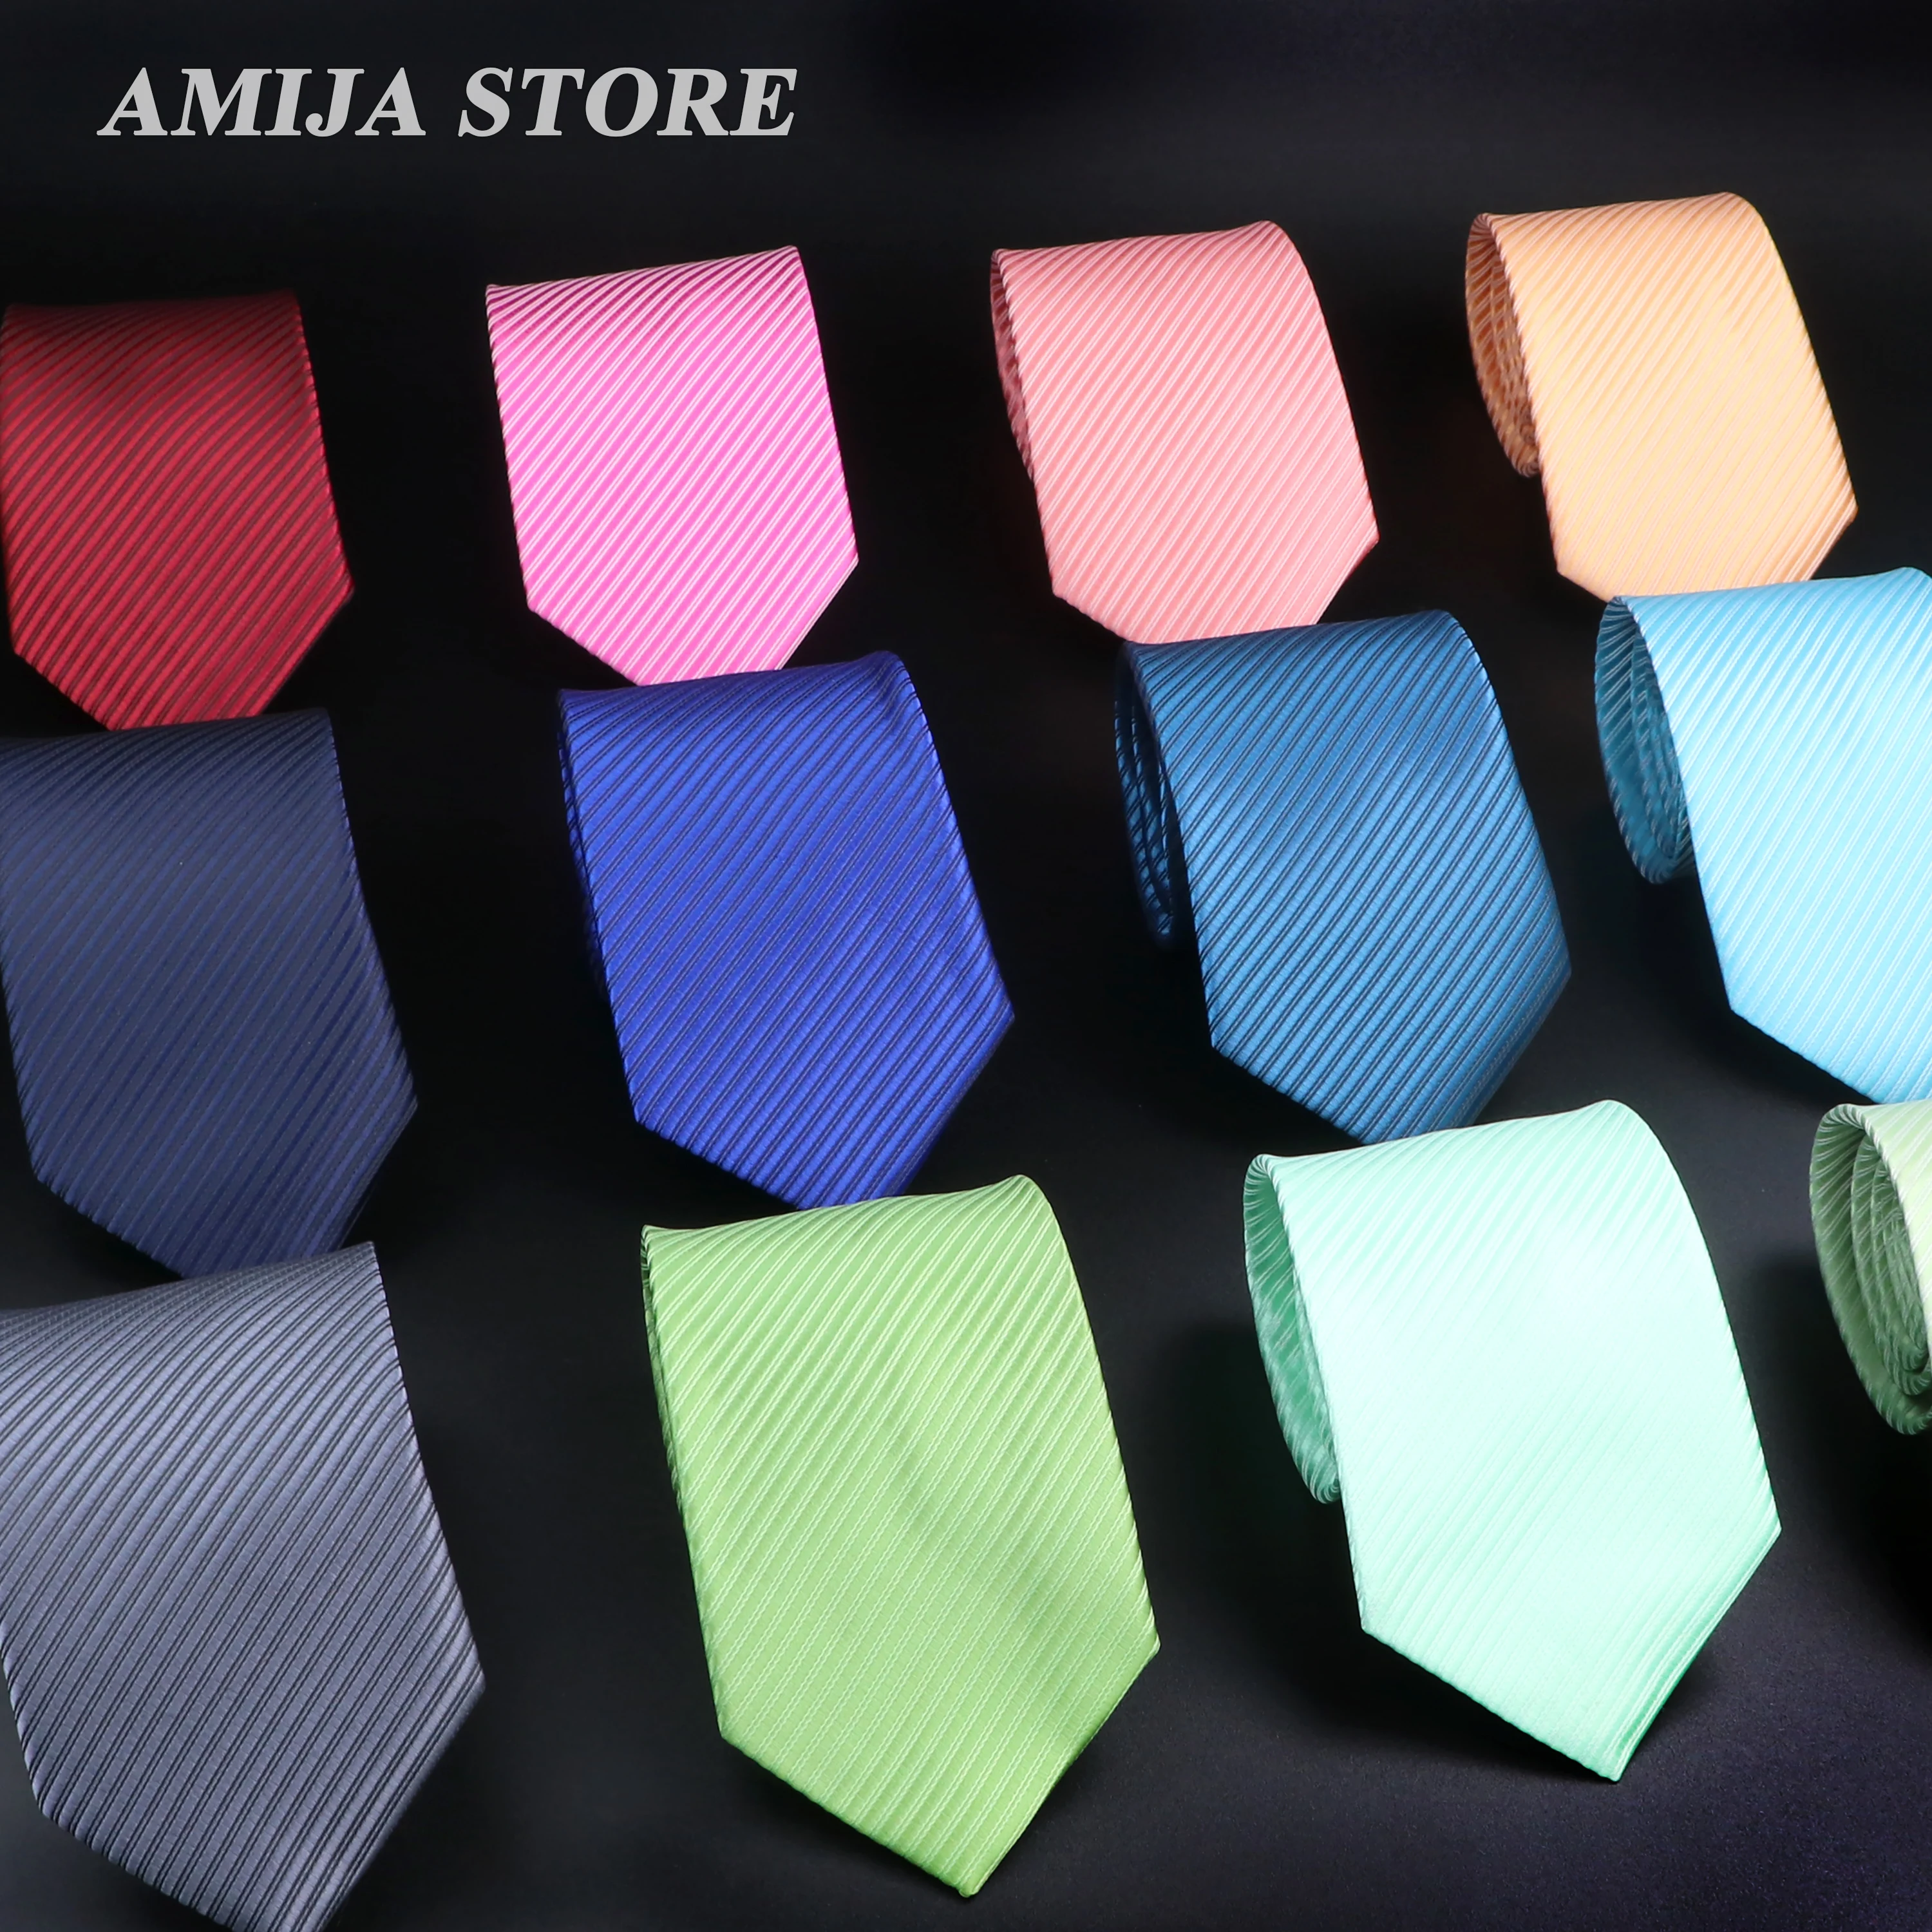 

New Soild Color Twill Tie Colorful Polyester Ties 7.5cm Width Teal Blue Green Necktie Party Wedding Best Daily Gift Accessories